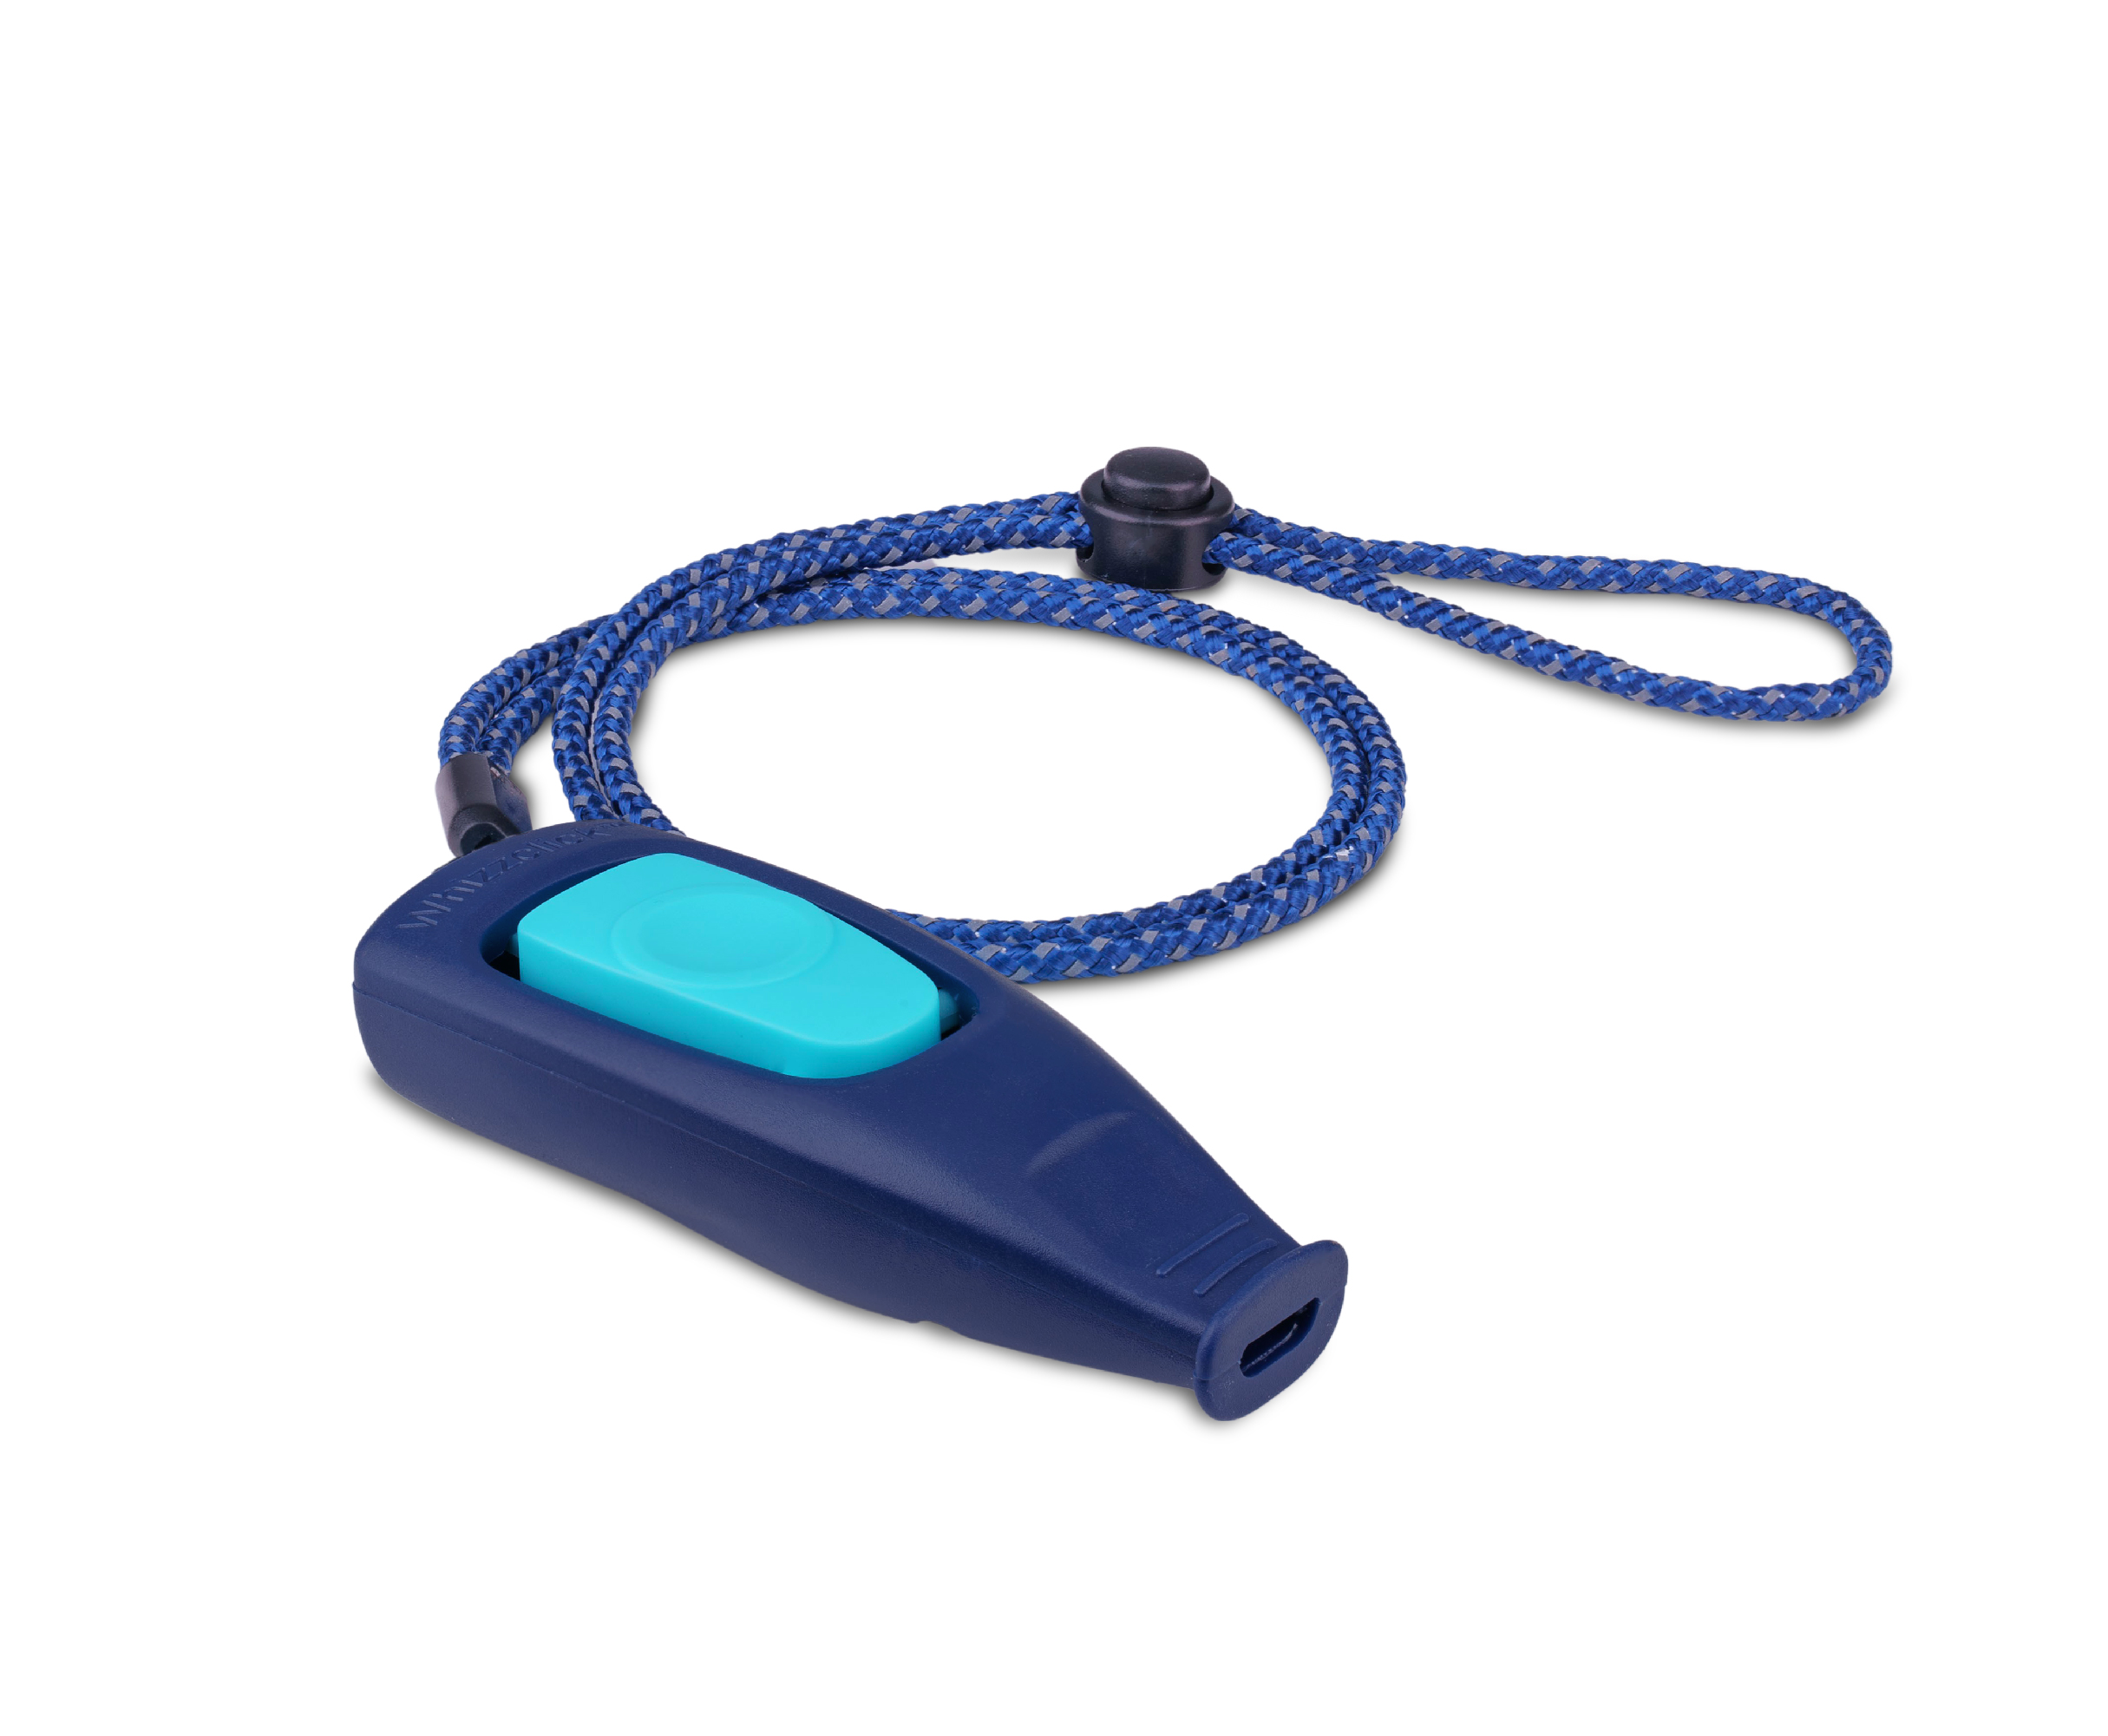 Turquoise 2-in-1 whistle and clicker